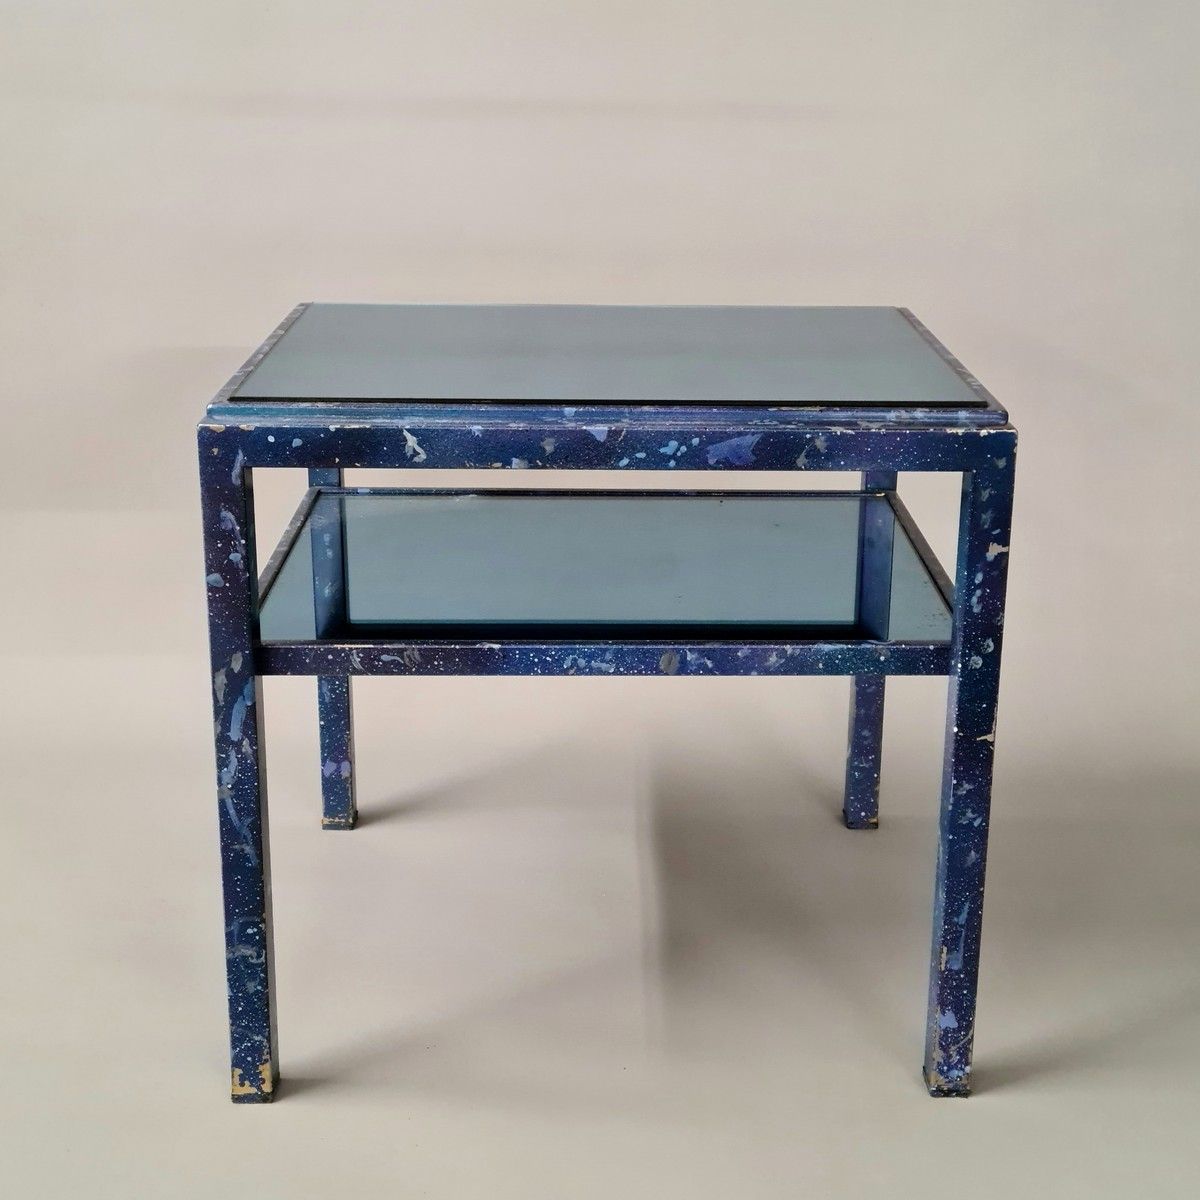 Null JOY DE ROHAN CHABOT (Born in 1942) TABLE WITH CHAIR in painted aluminum

44&hellip;